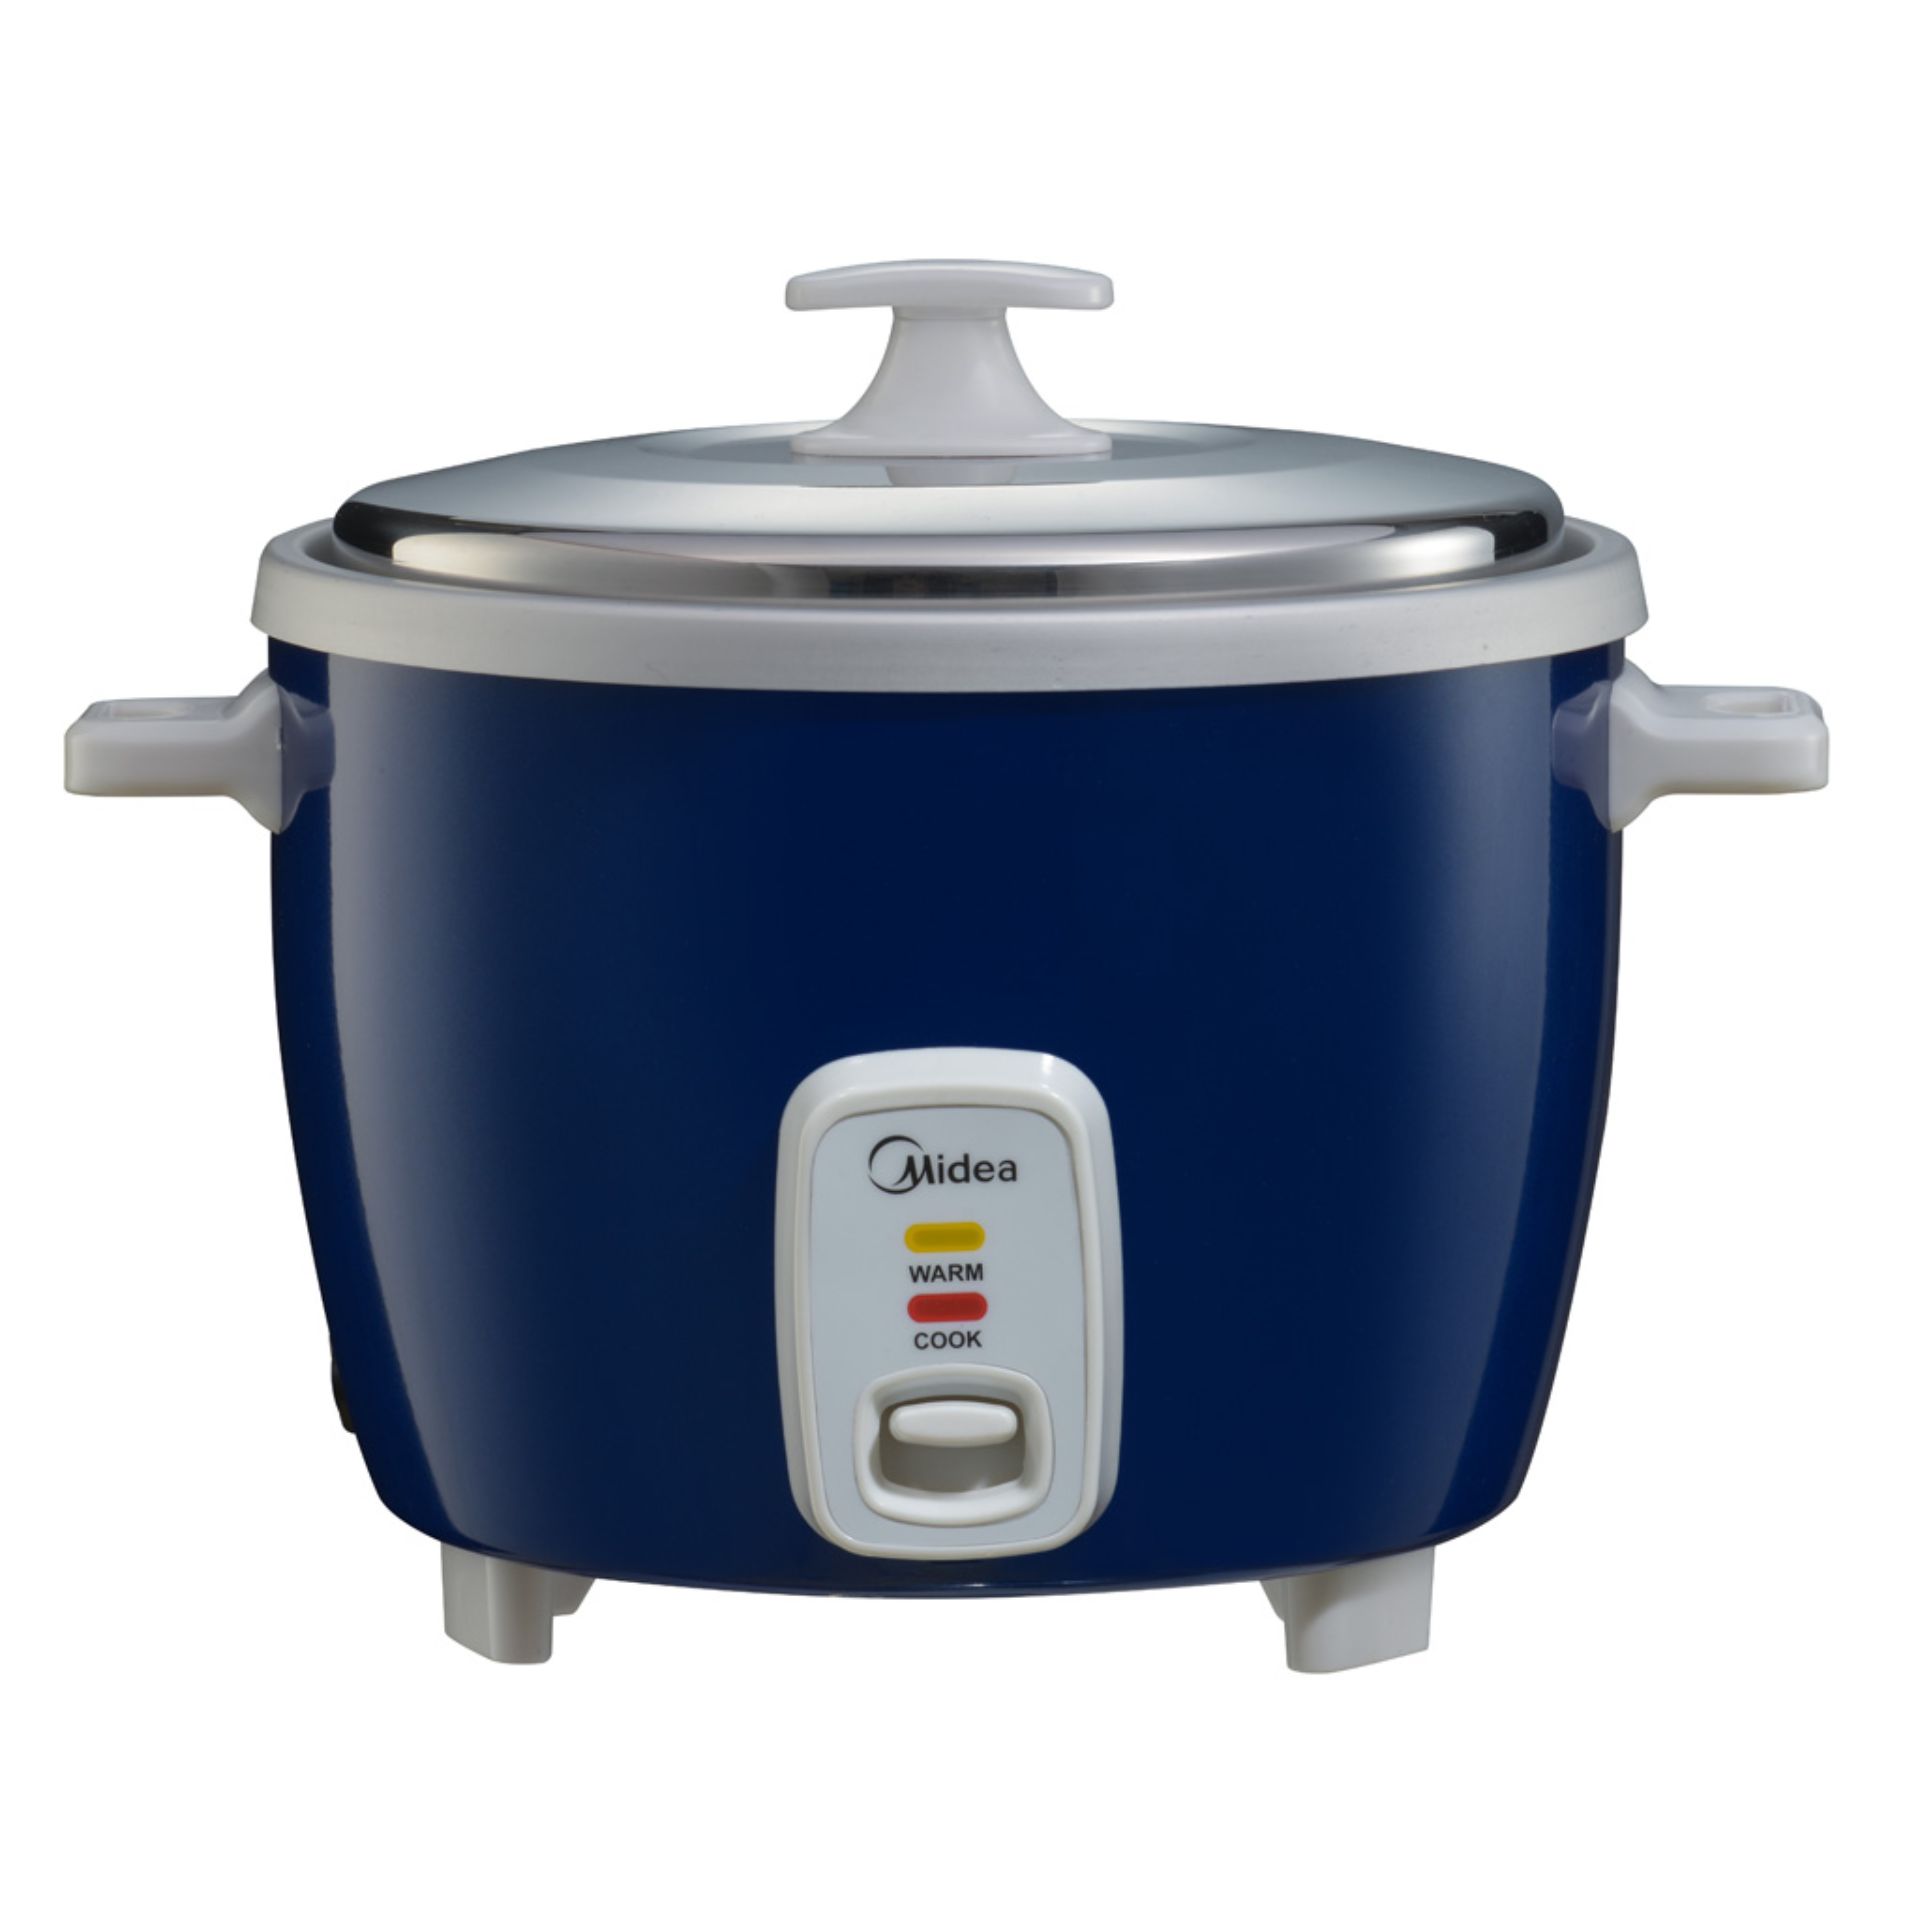 https://www.midea.com/content/dam/midea-aem/my/kitchen-appliances/cookers/rice-cookers/1-0l-conventional-rice-cooker-mr-gm10sda-b/gallery1.jpg